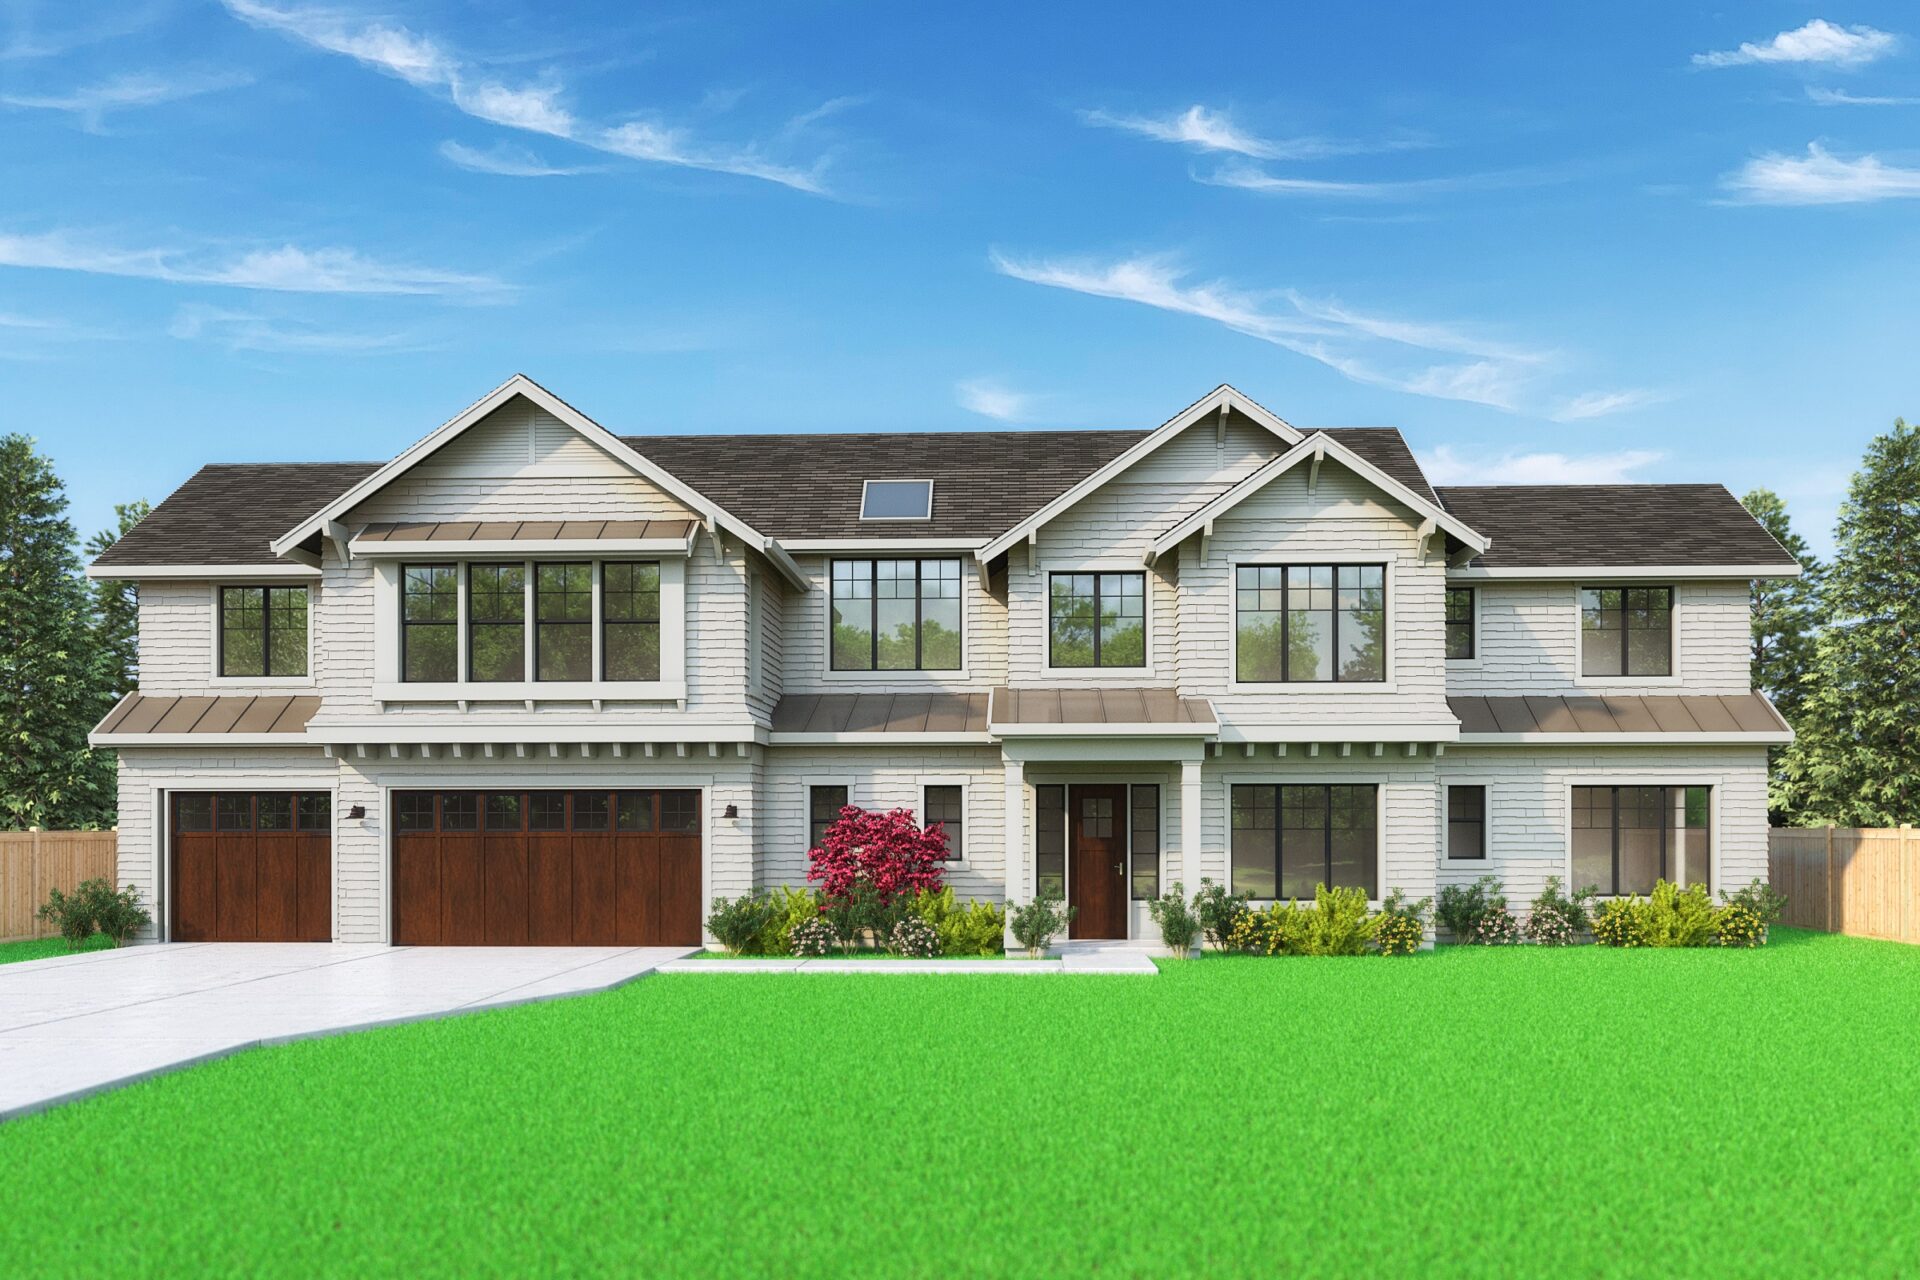 View our new luxury home construction on 3903 153rd AVE SE, in Bellevue, WA from MN Custom Homes